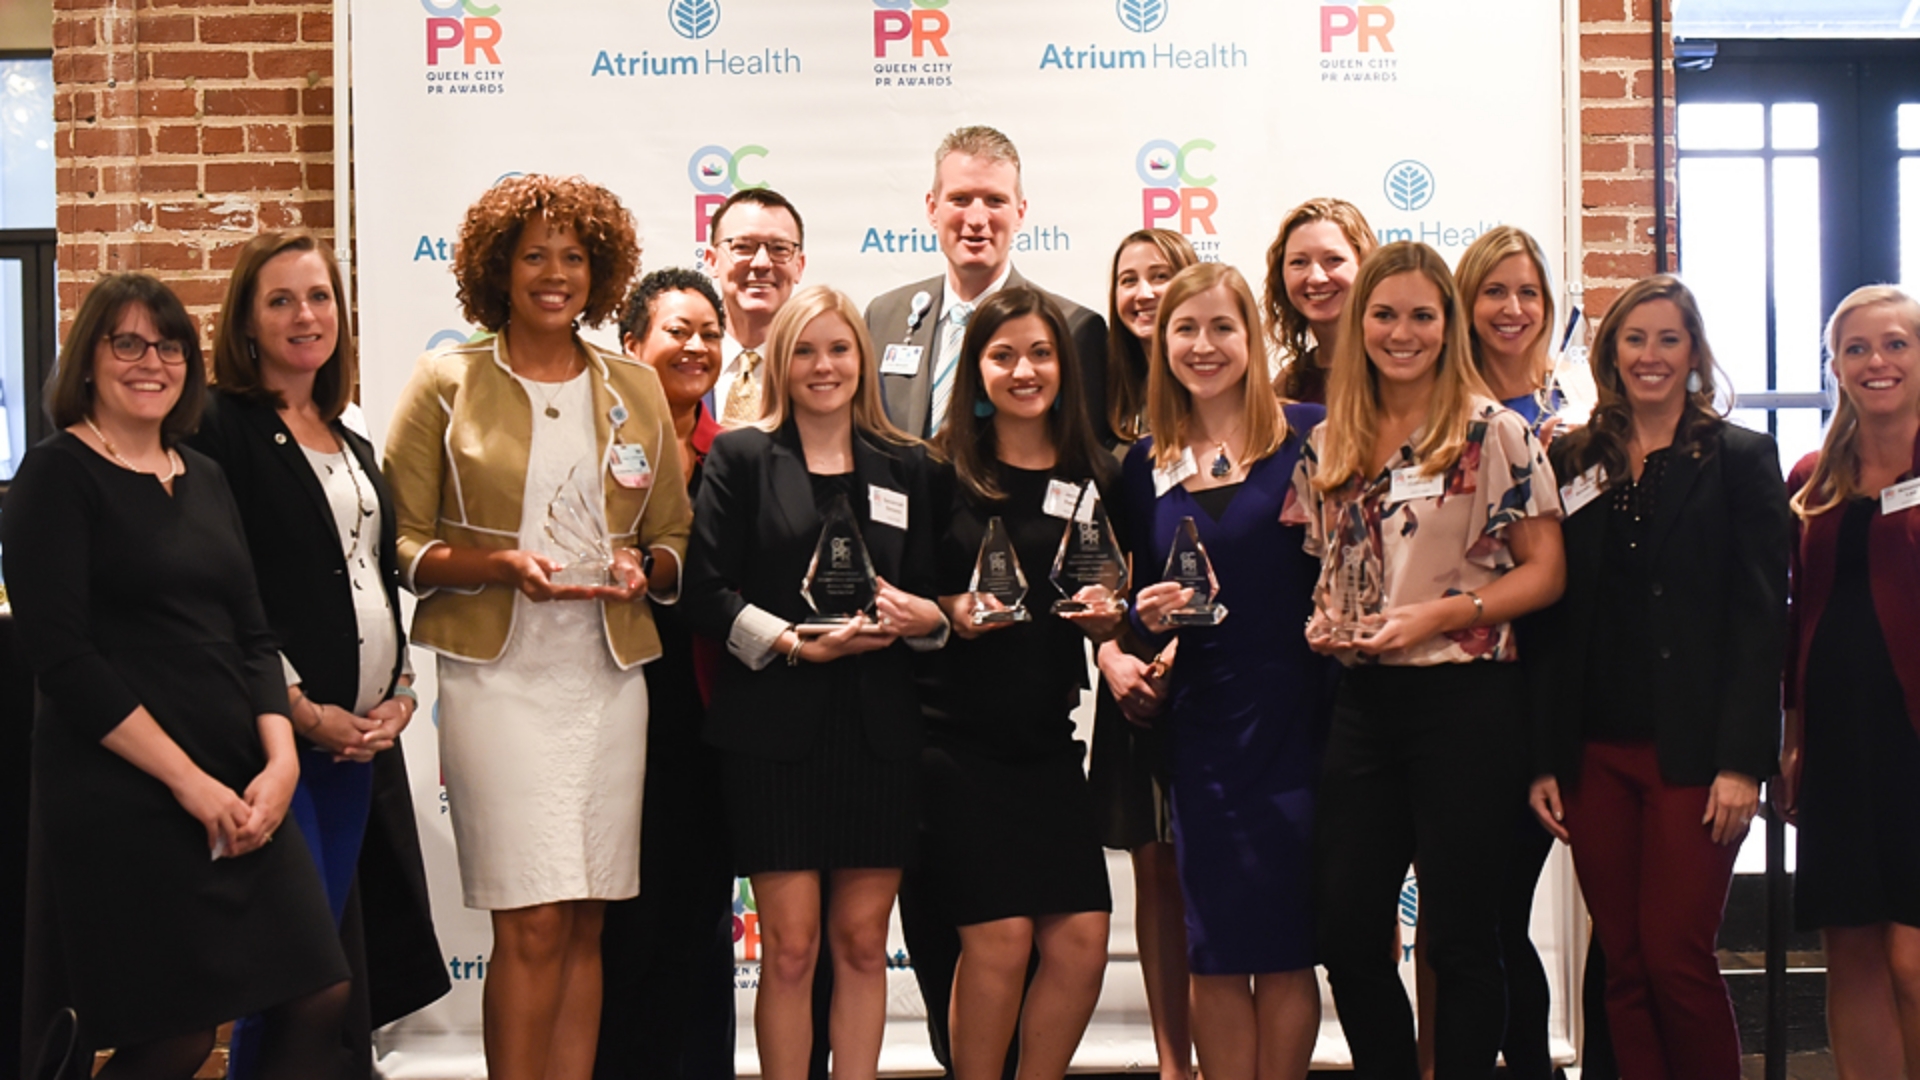 Atrium Health’s Corporate Communications team received local and regional recognition from the Public Relations Society of America (PRSA) Charlotte chapter for leading strategic and effective communications campaigns.